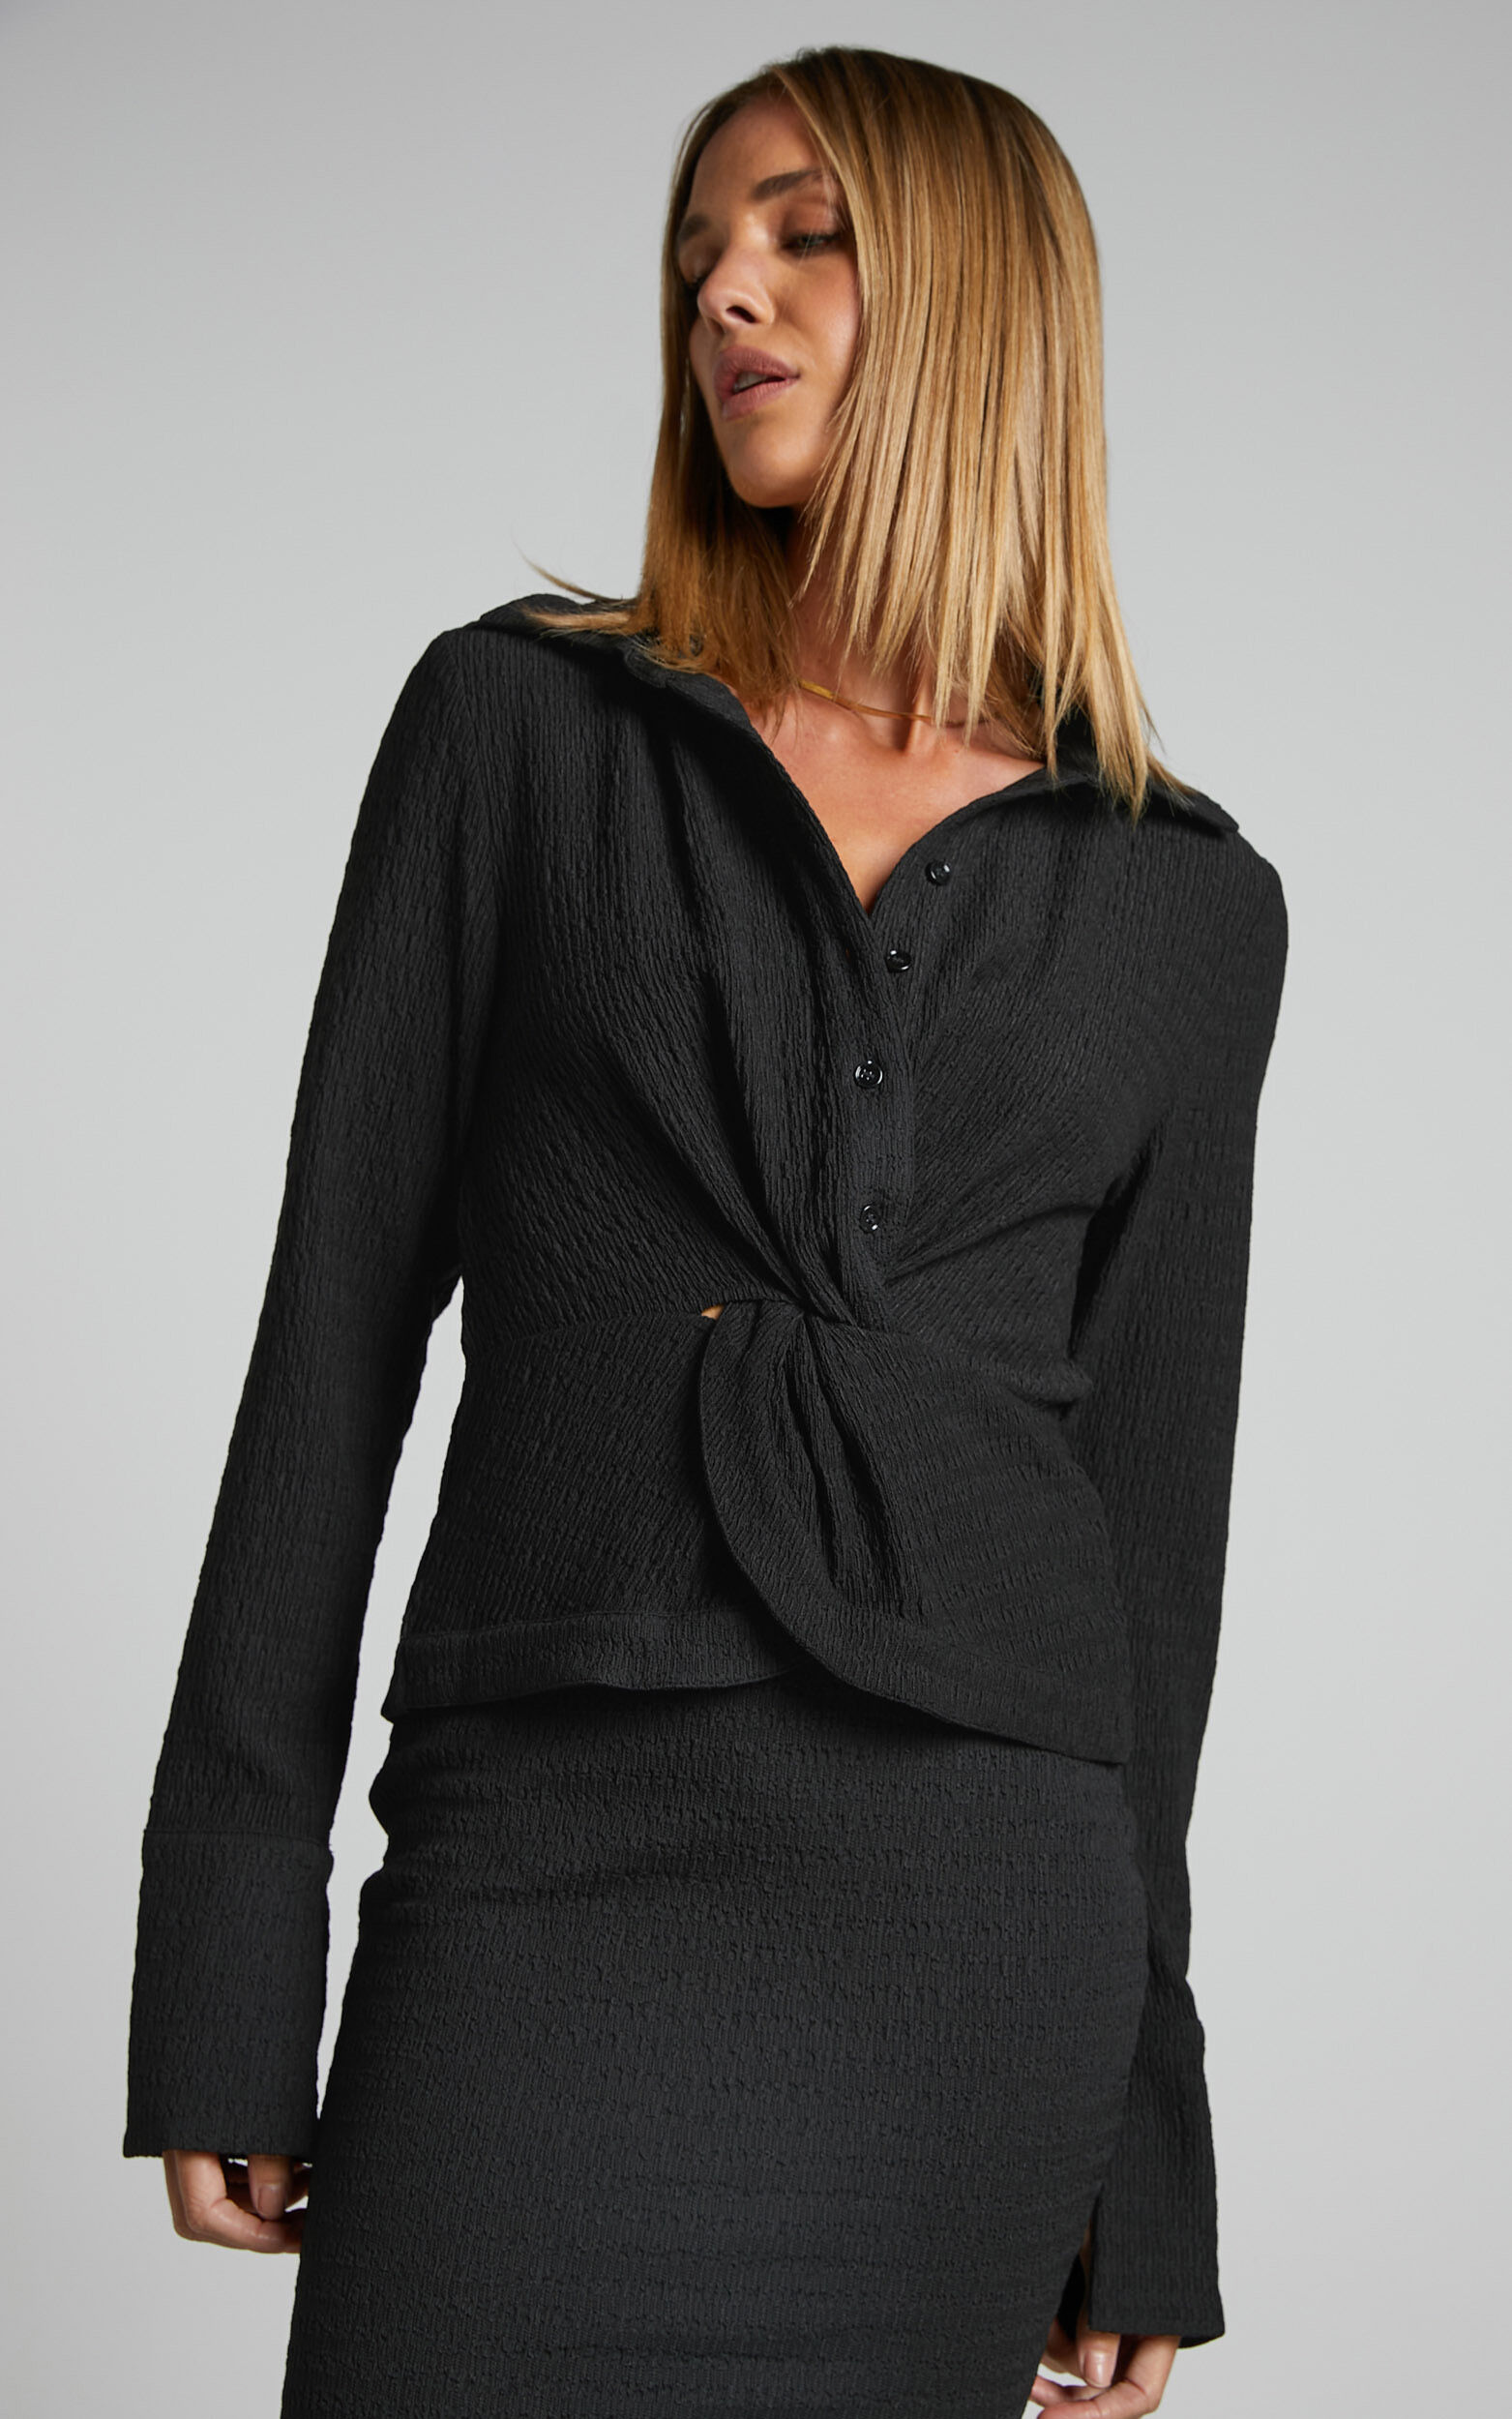 Althea Top - Knot Front Long Sleeve Top in Black - 06, BLK1